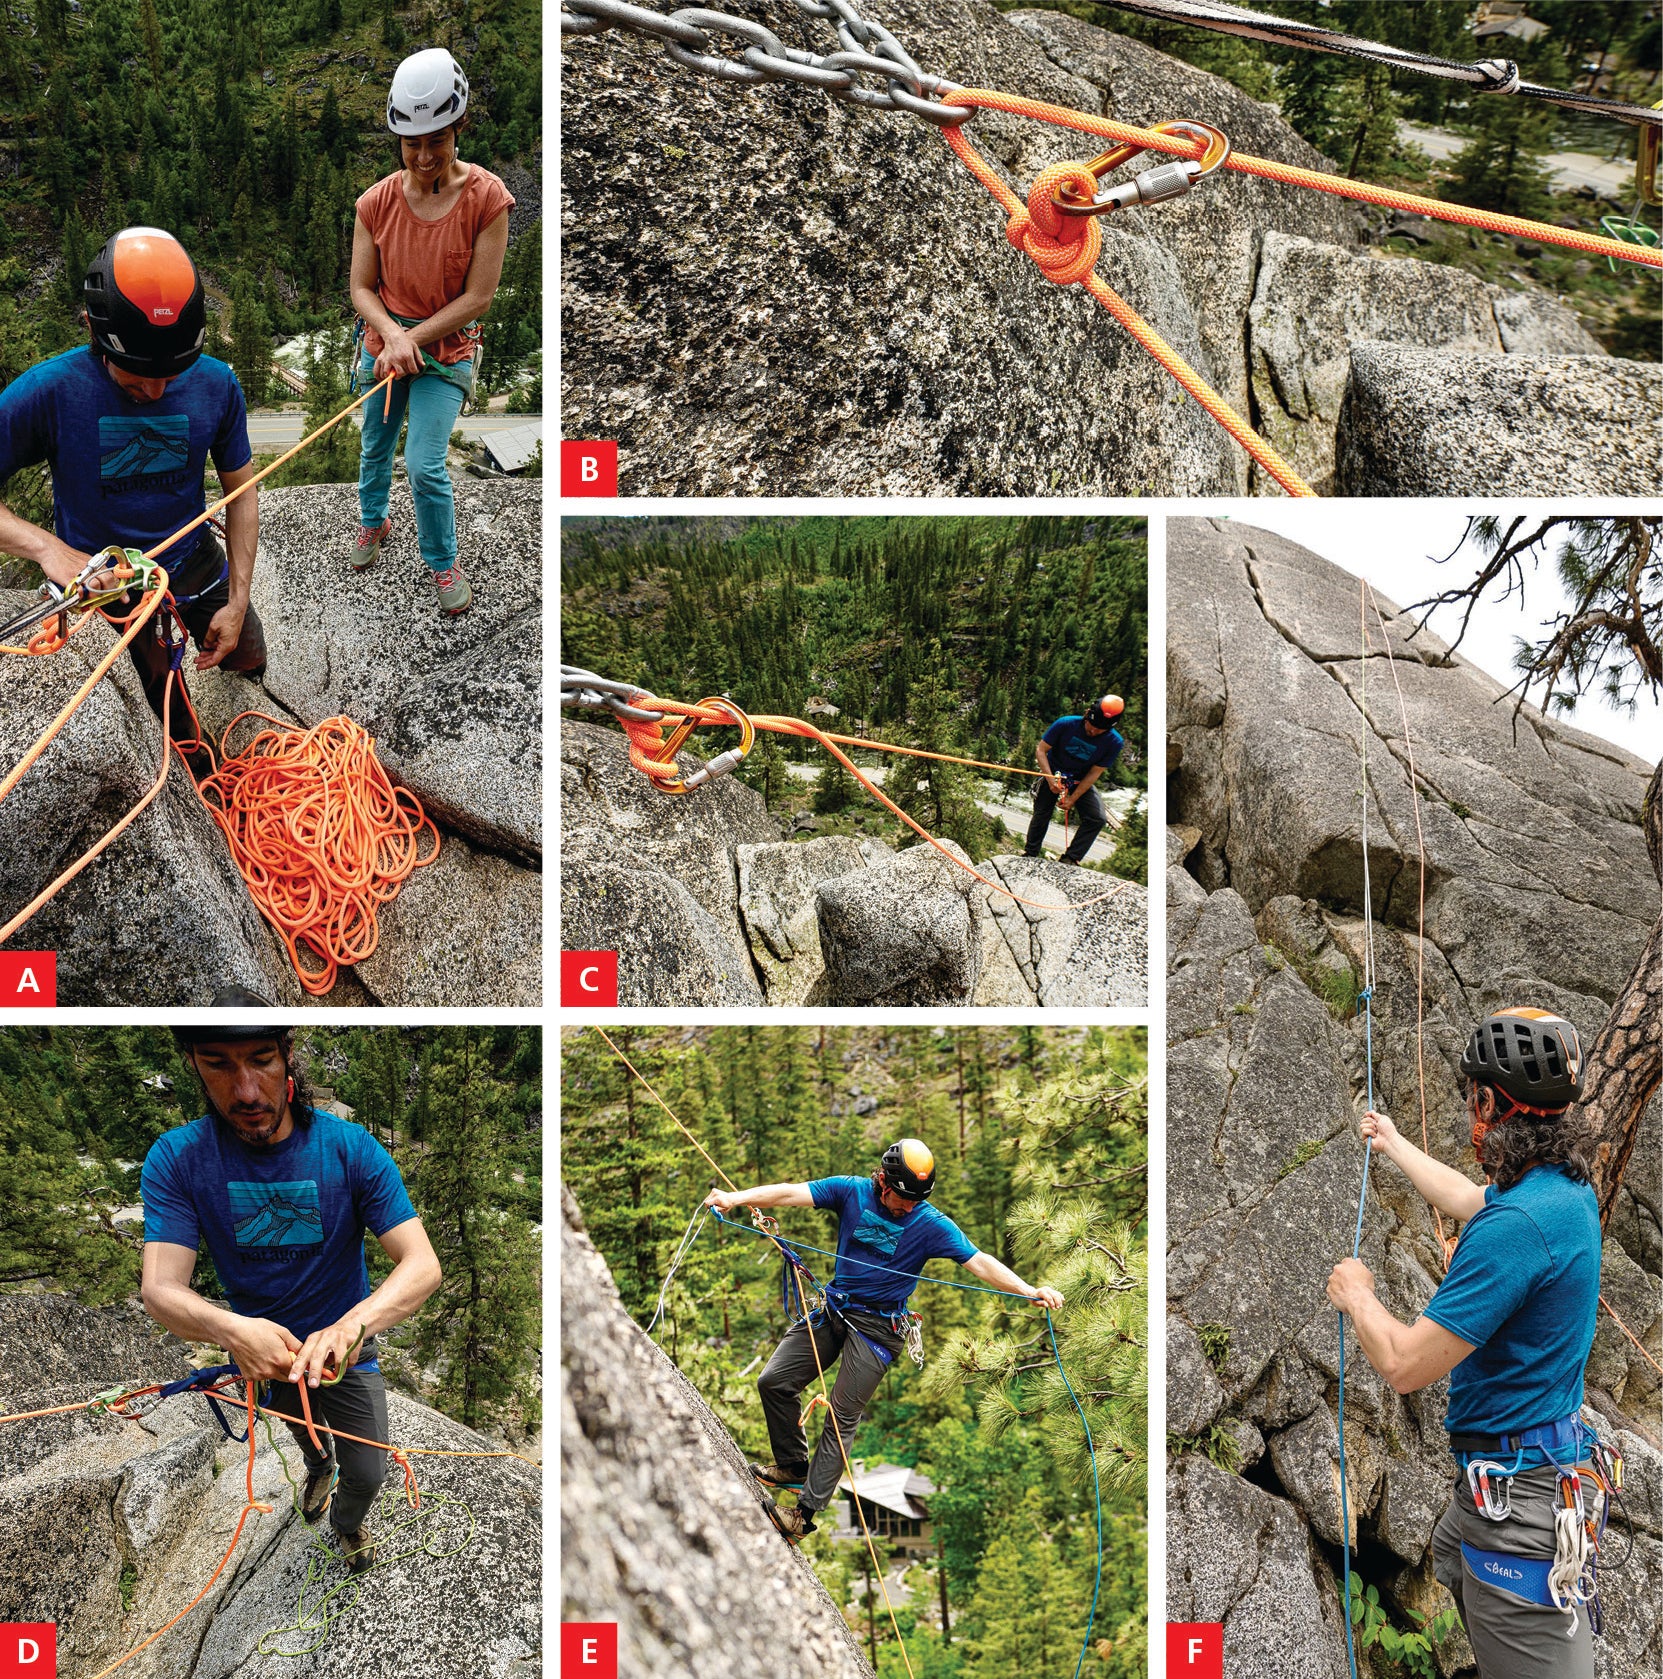 Want to try rappelling? Here's what you need to know!